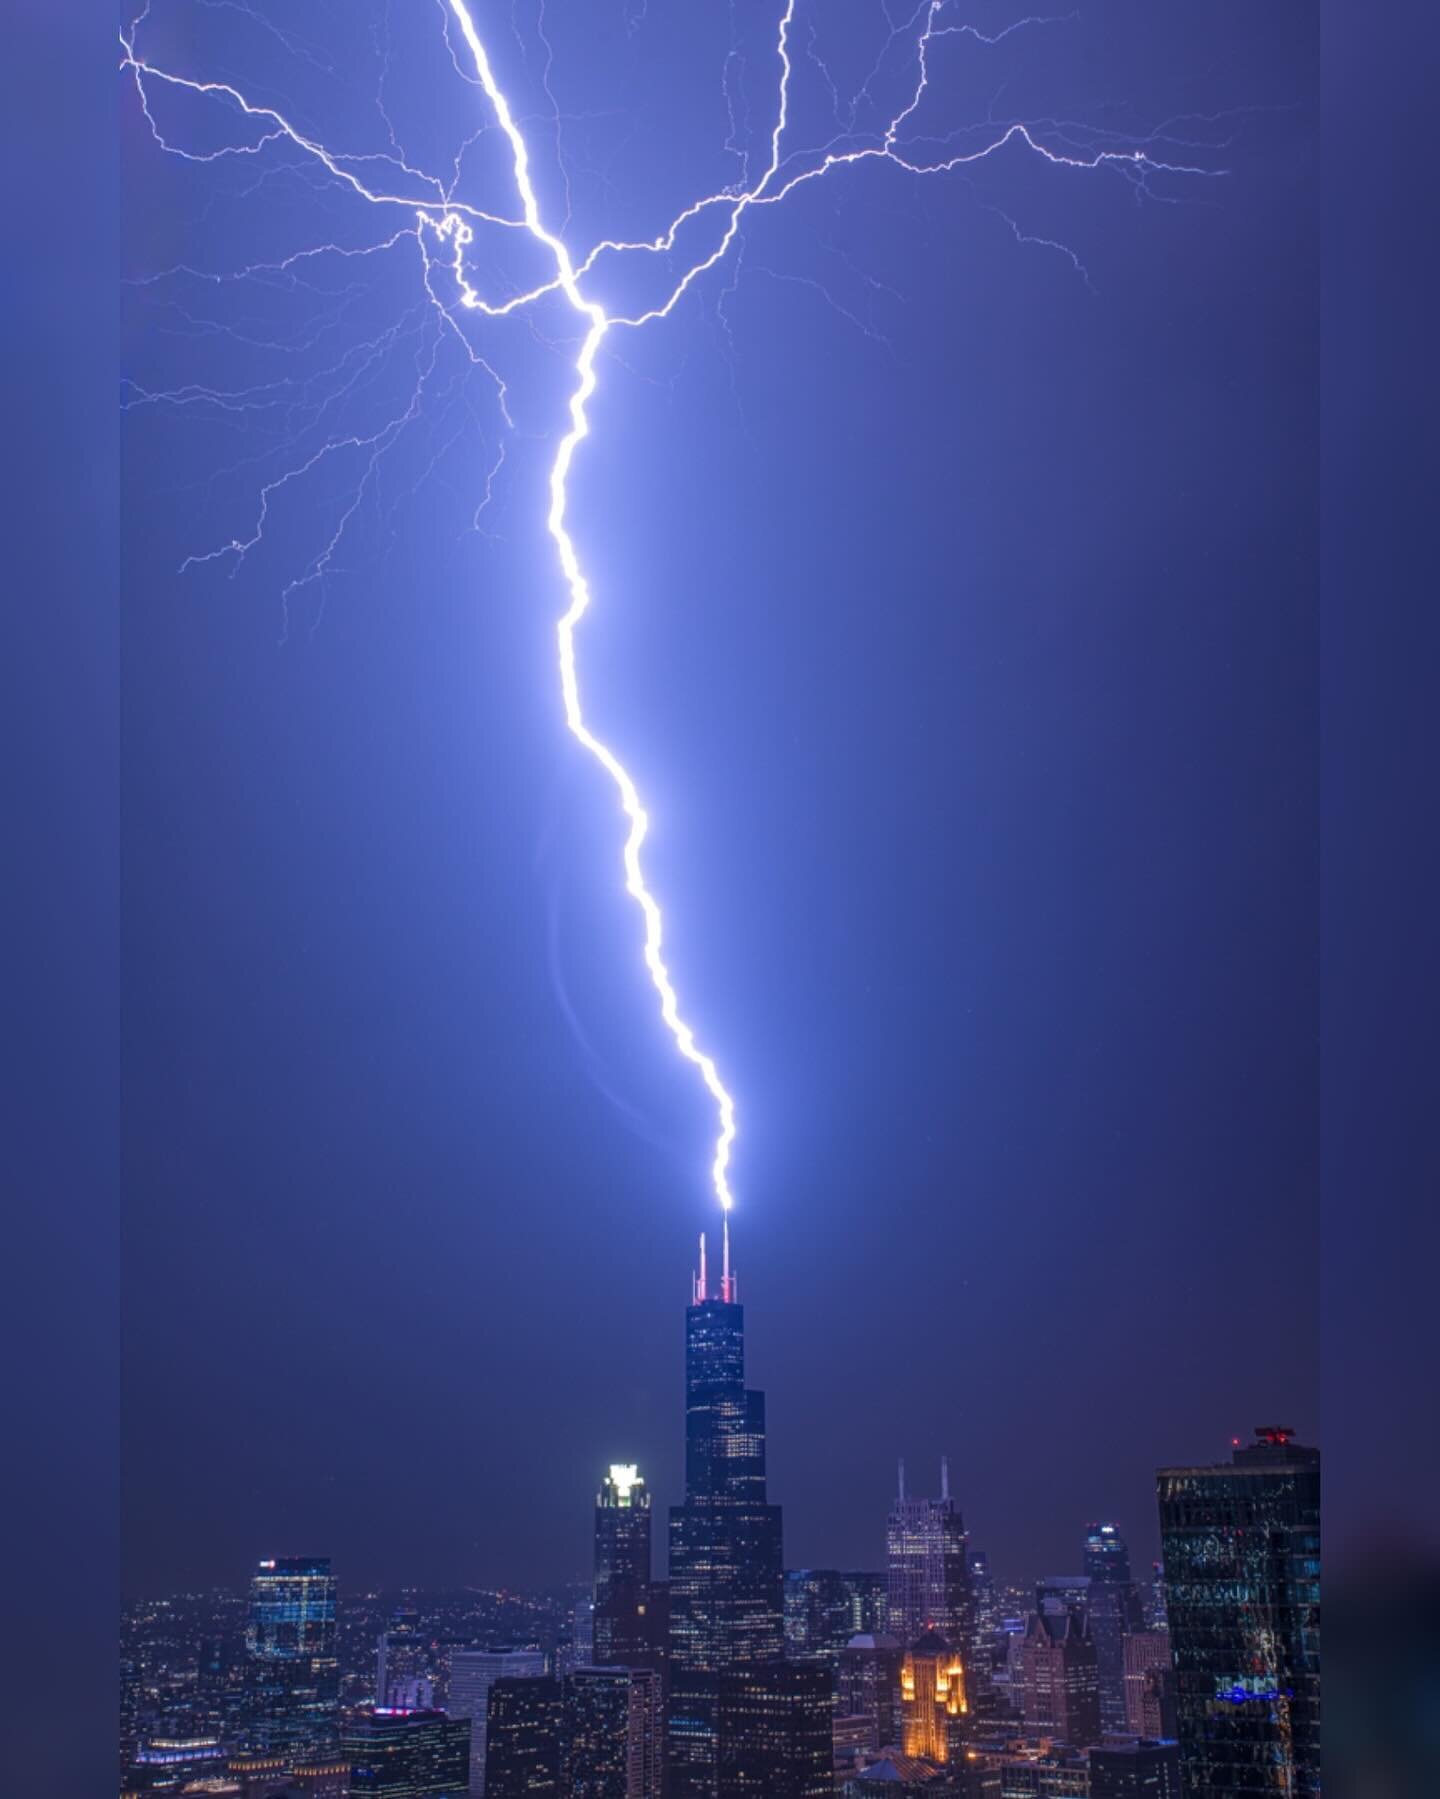 If you would have told me that my first storm chase of the year would consist of capturing upward lightning off of Willis Tower in Chicago during February, there would have been no chance of me believing you. If anything, I would have laughed. Yet, t